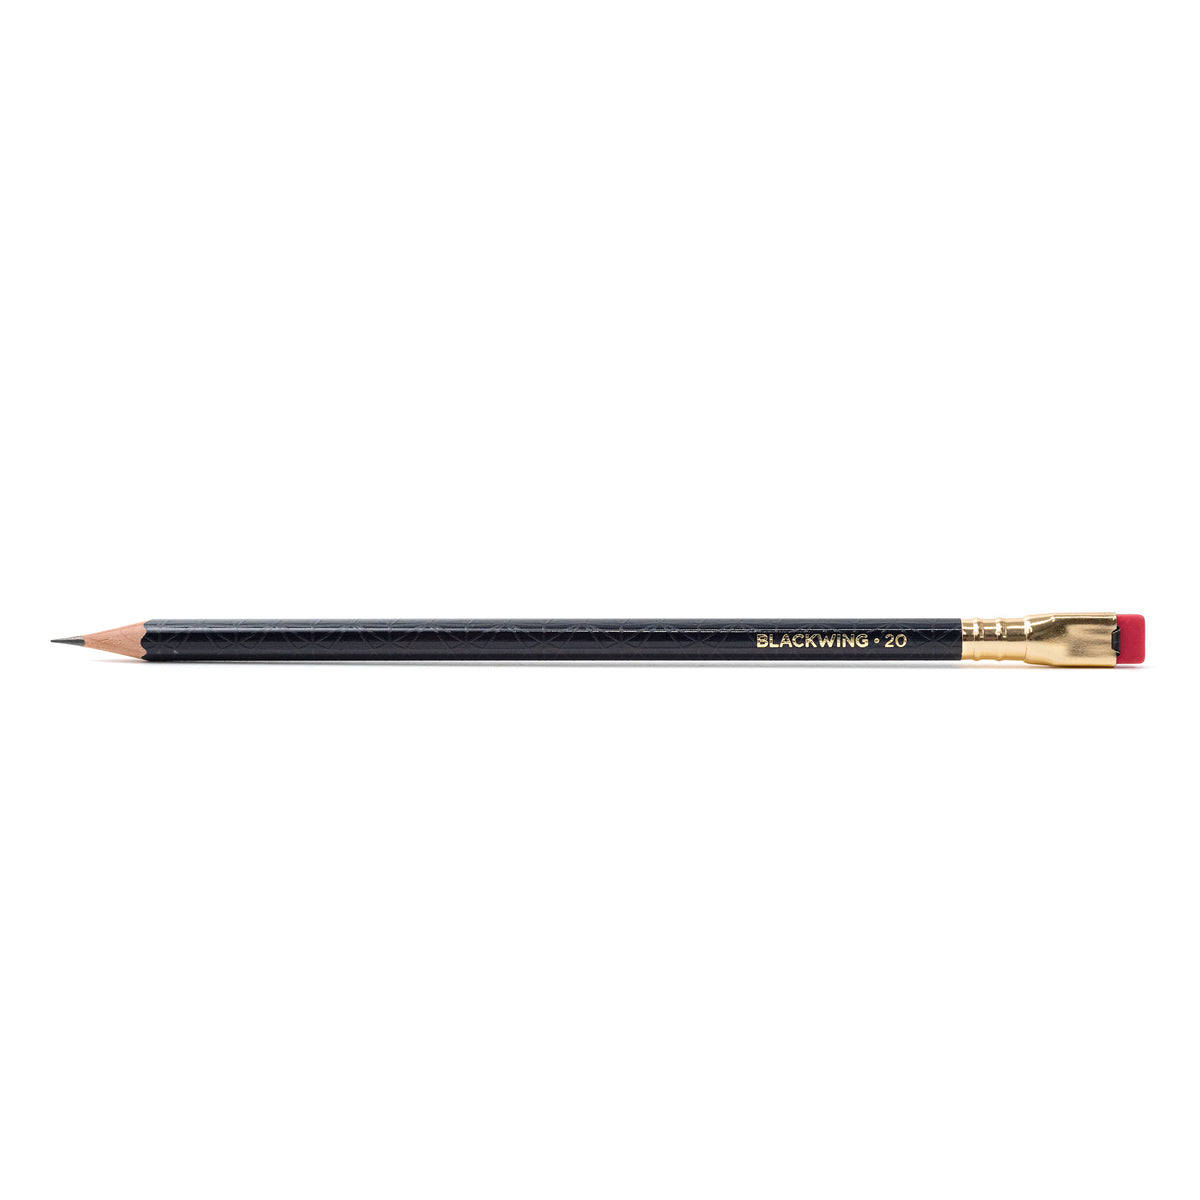 A Blackwing Volume 20 (Set of 12) pencil with a red tip rests on a white tabletop.